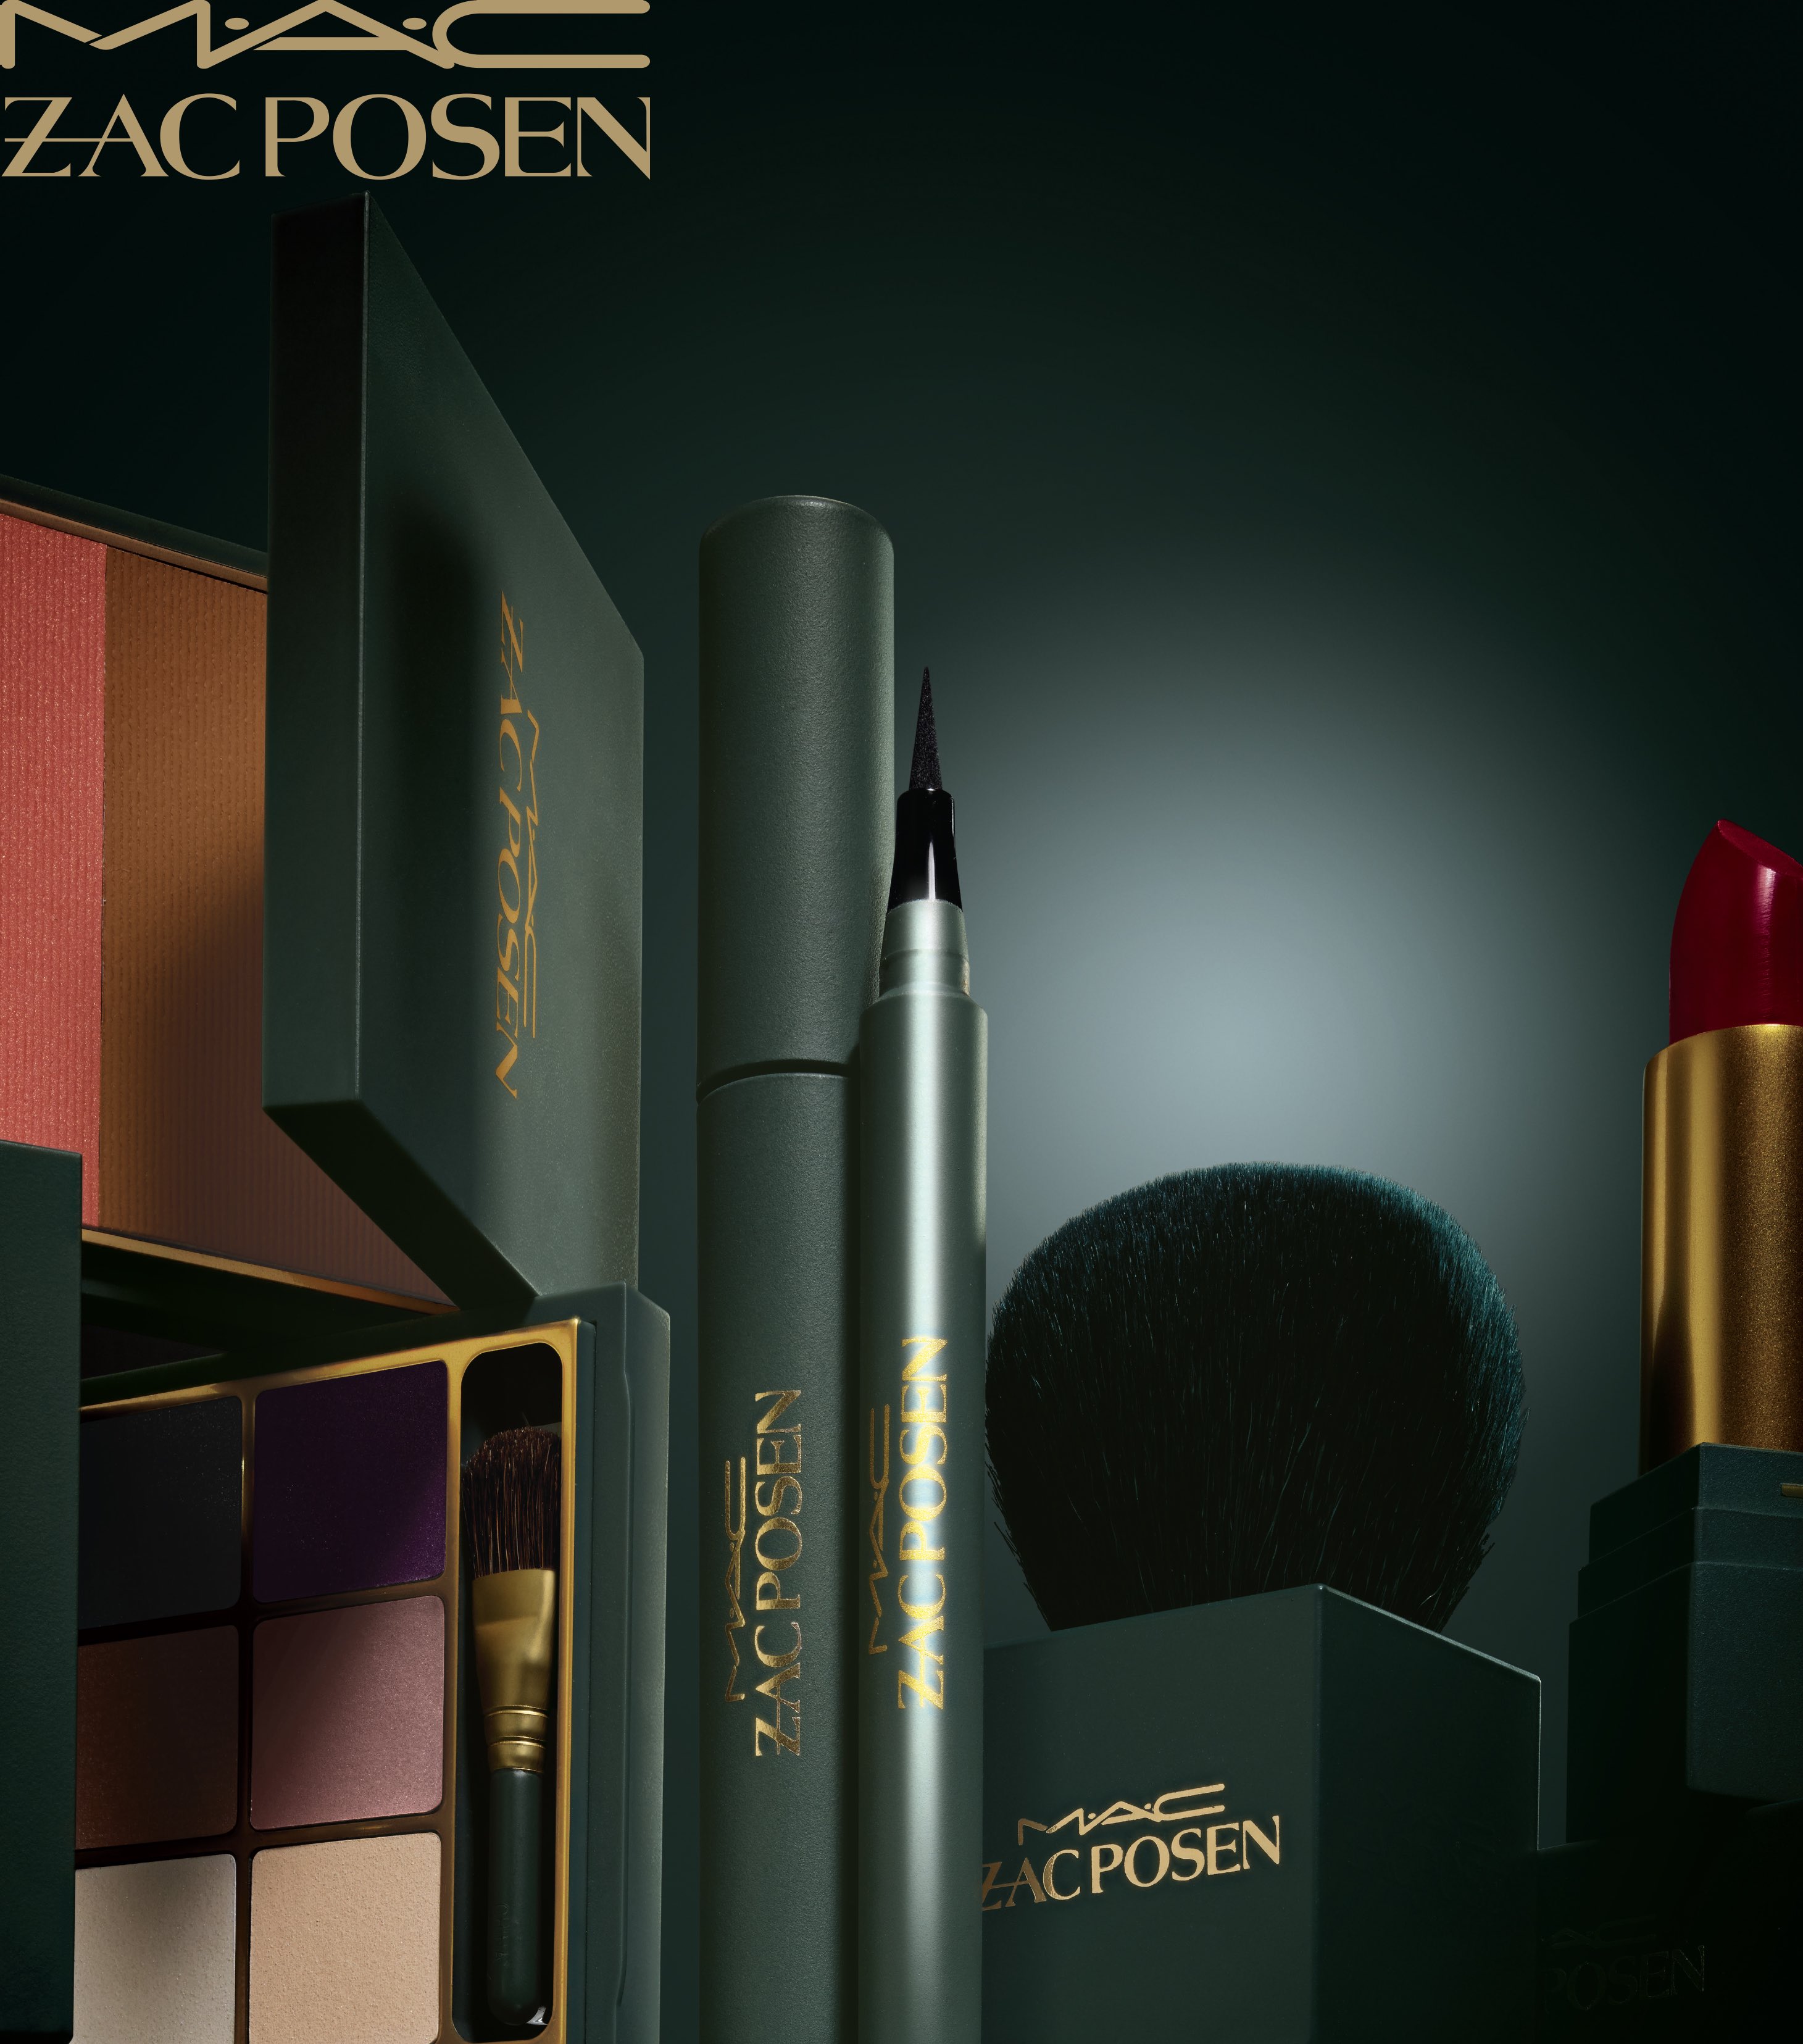 Zac Posen teams up with MAC for new make-up collaboration